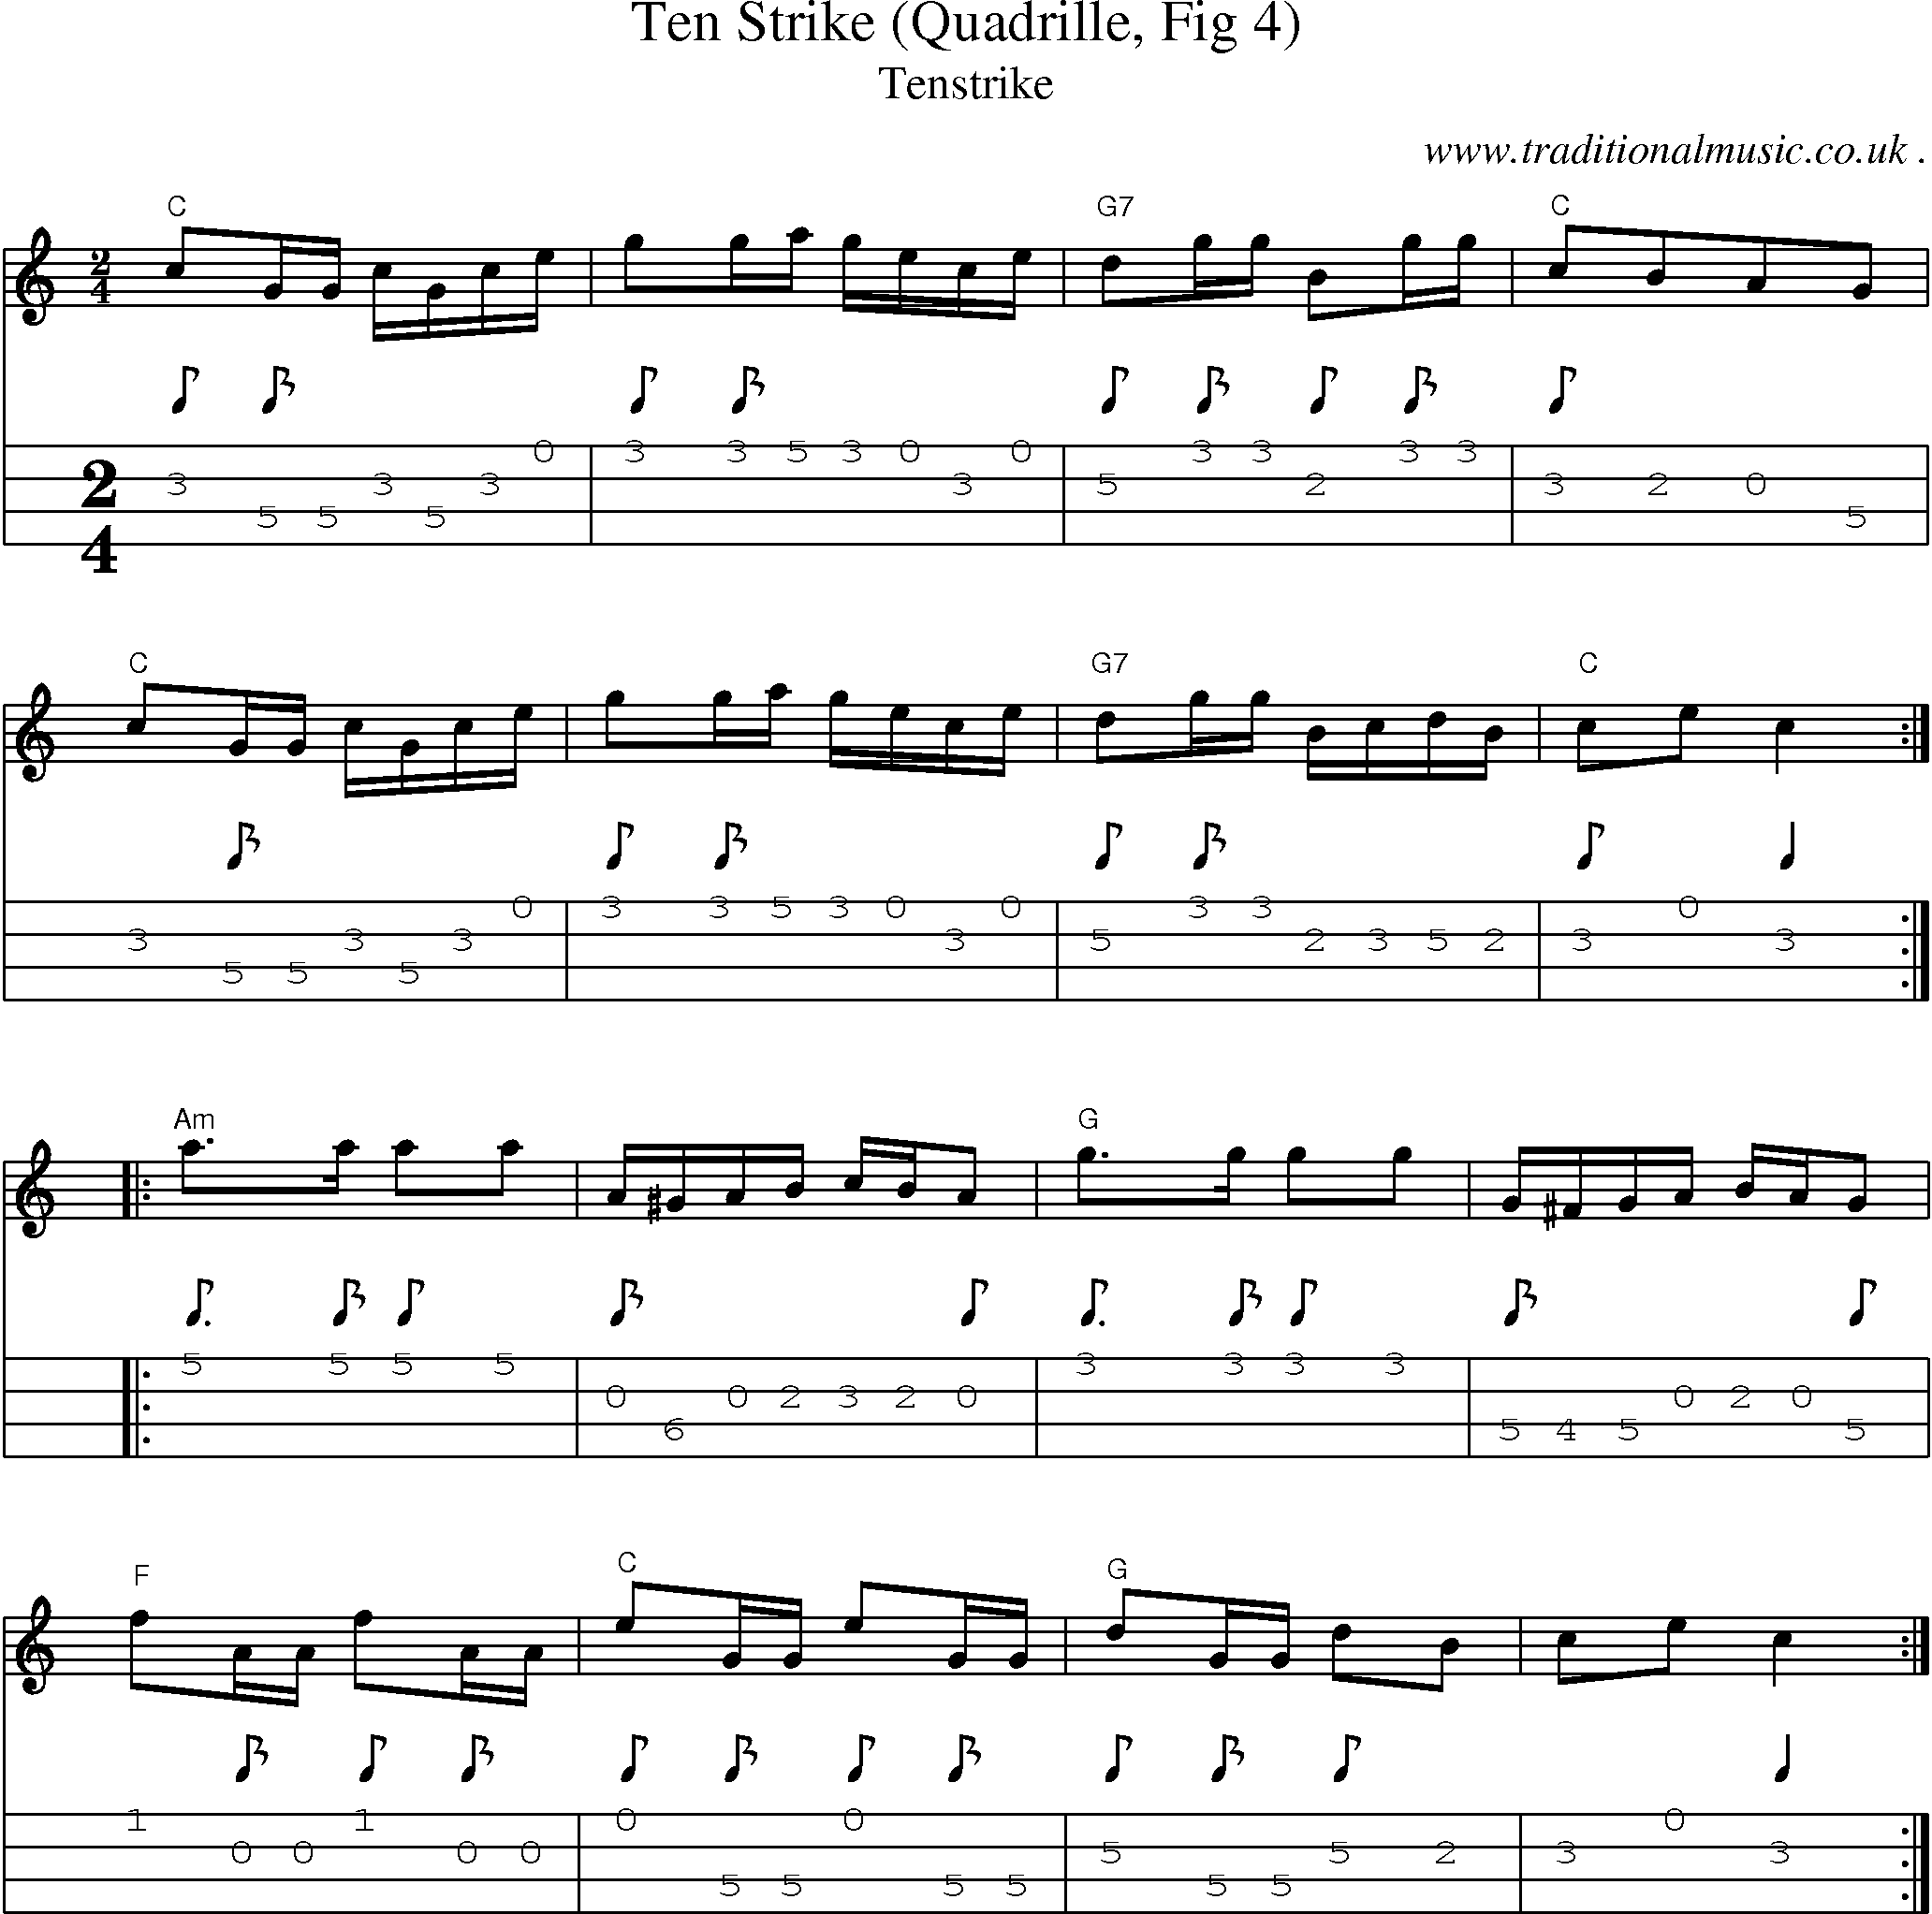 Music Score and Guitar Tabs for Ten Strike (quadrille Fig 4)